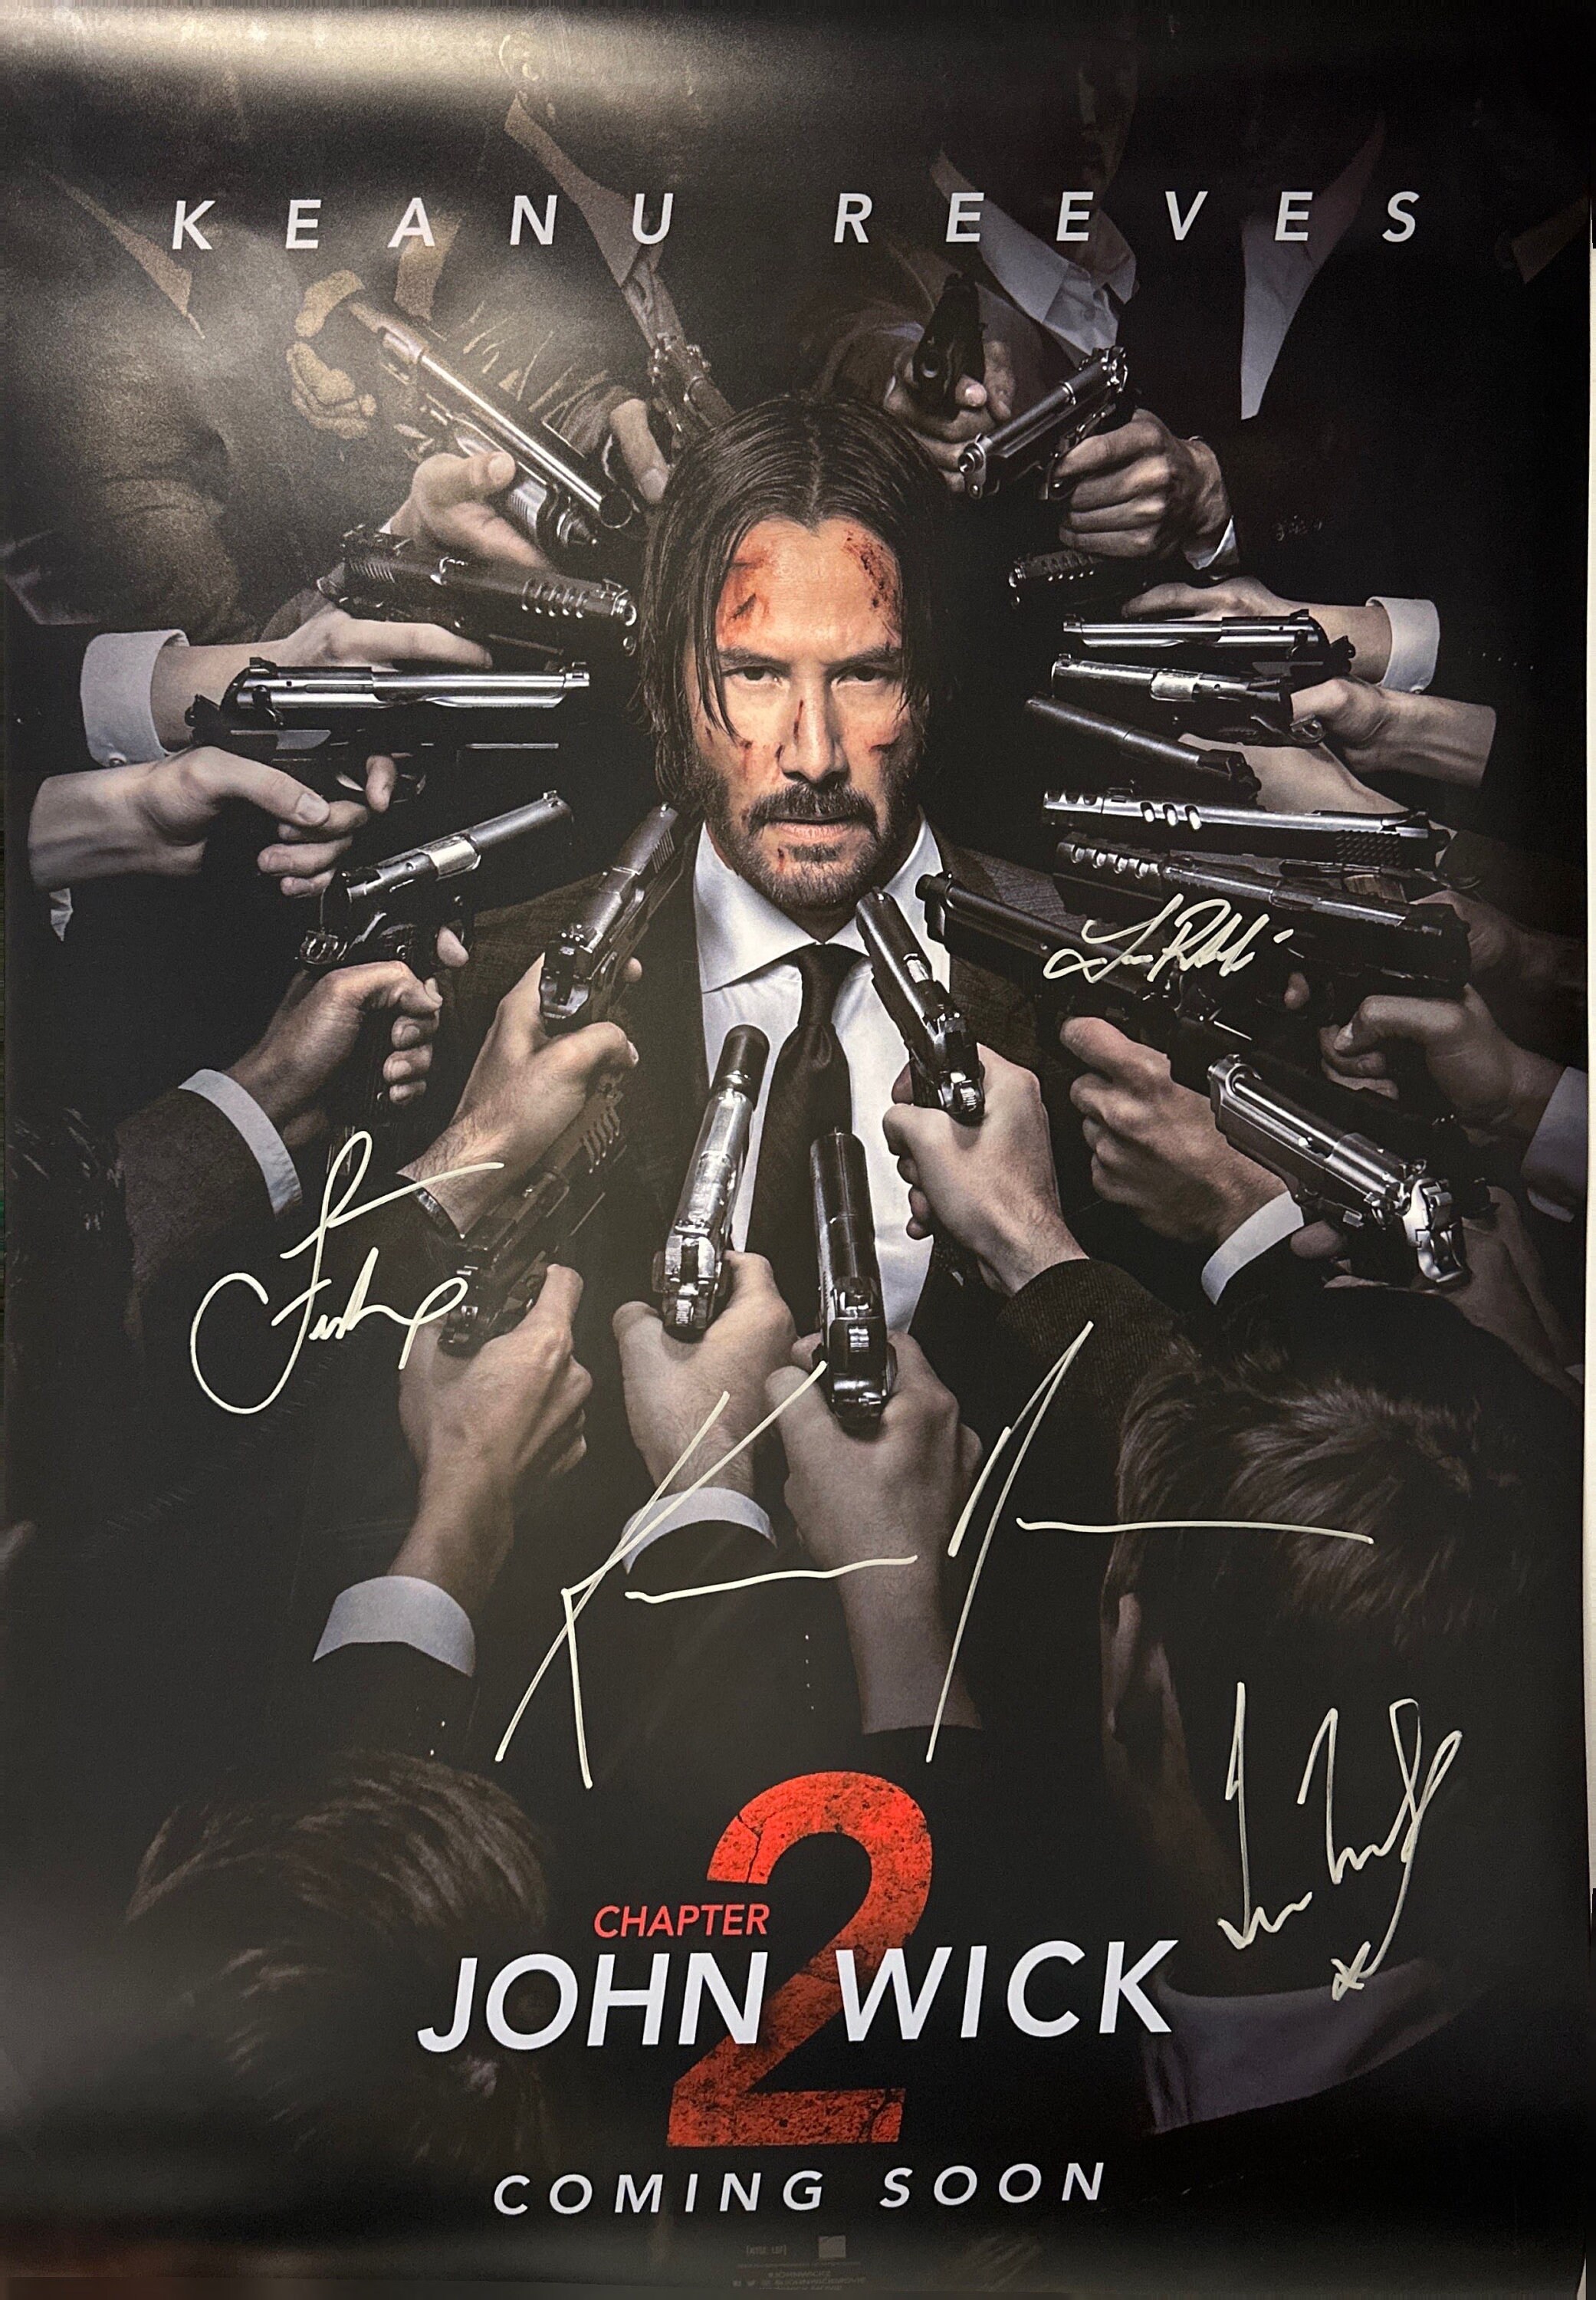 JOHN WICK Chapter 2 Cast(x6) Authentic Hand-Signed Keanu Reeves 11x14  Photo